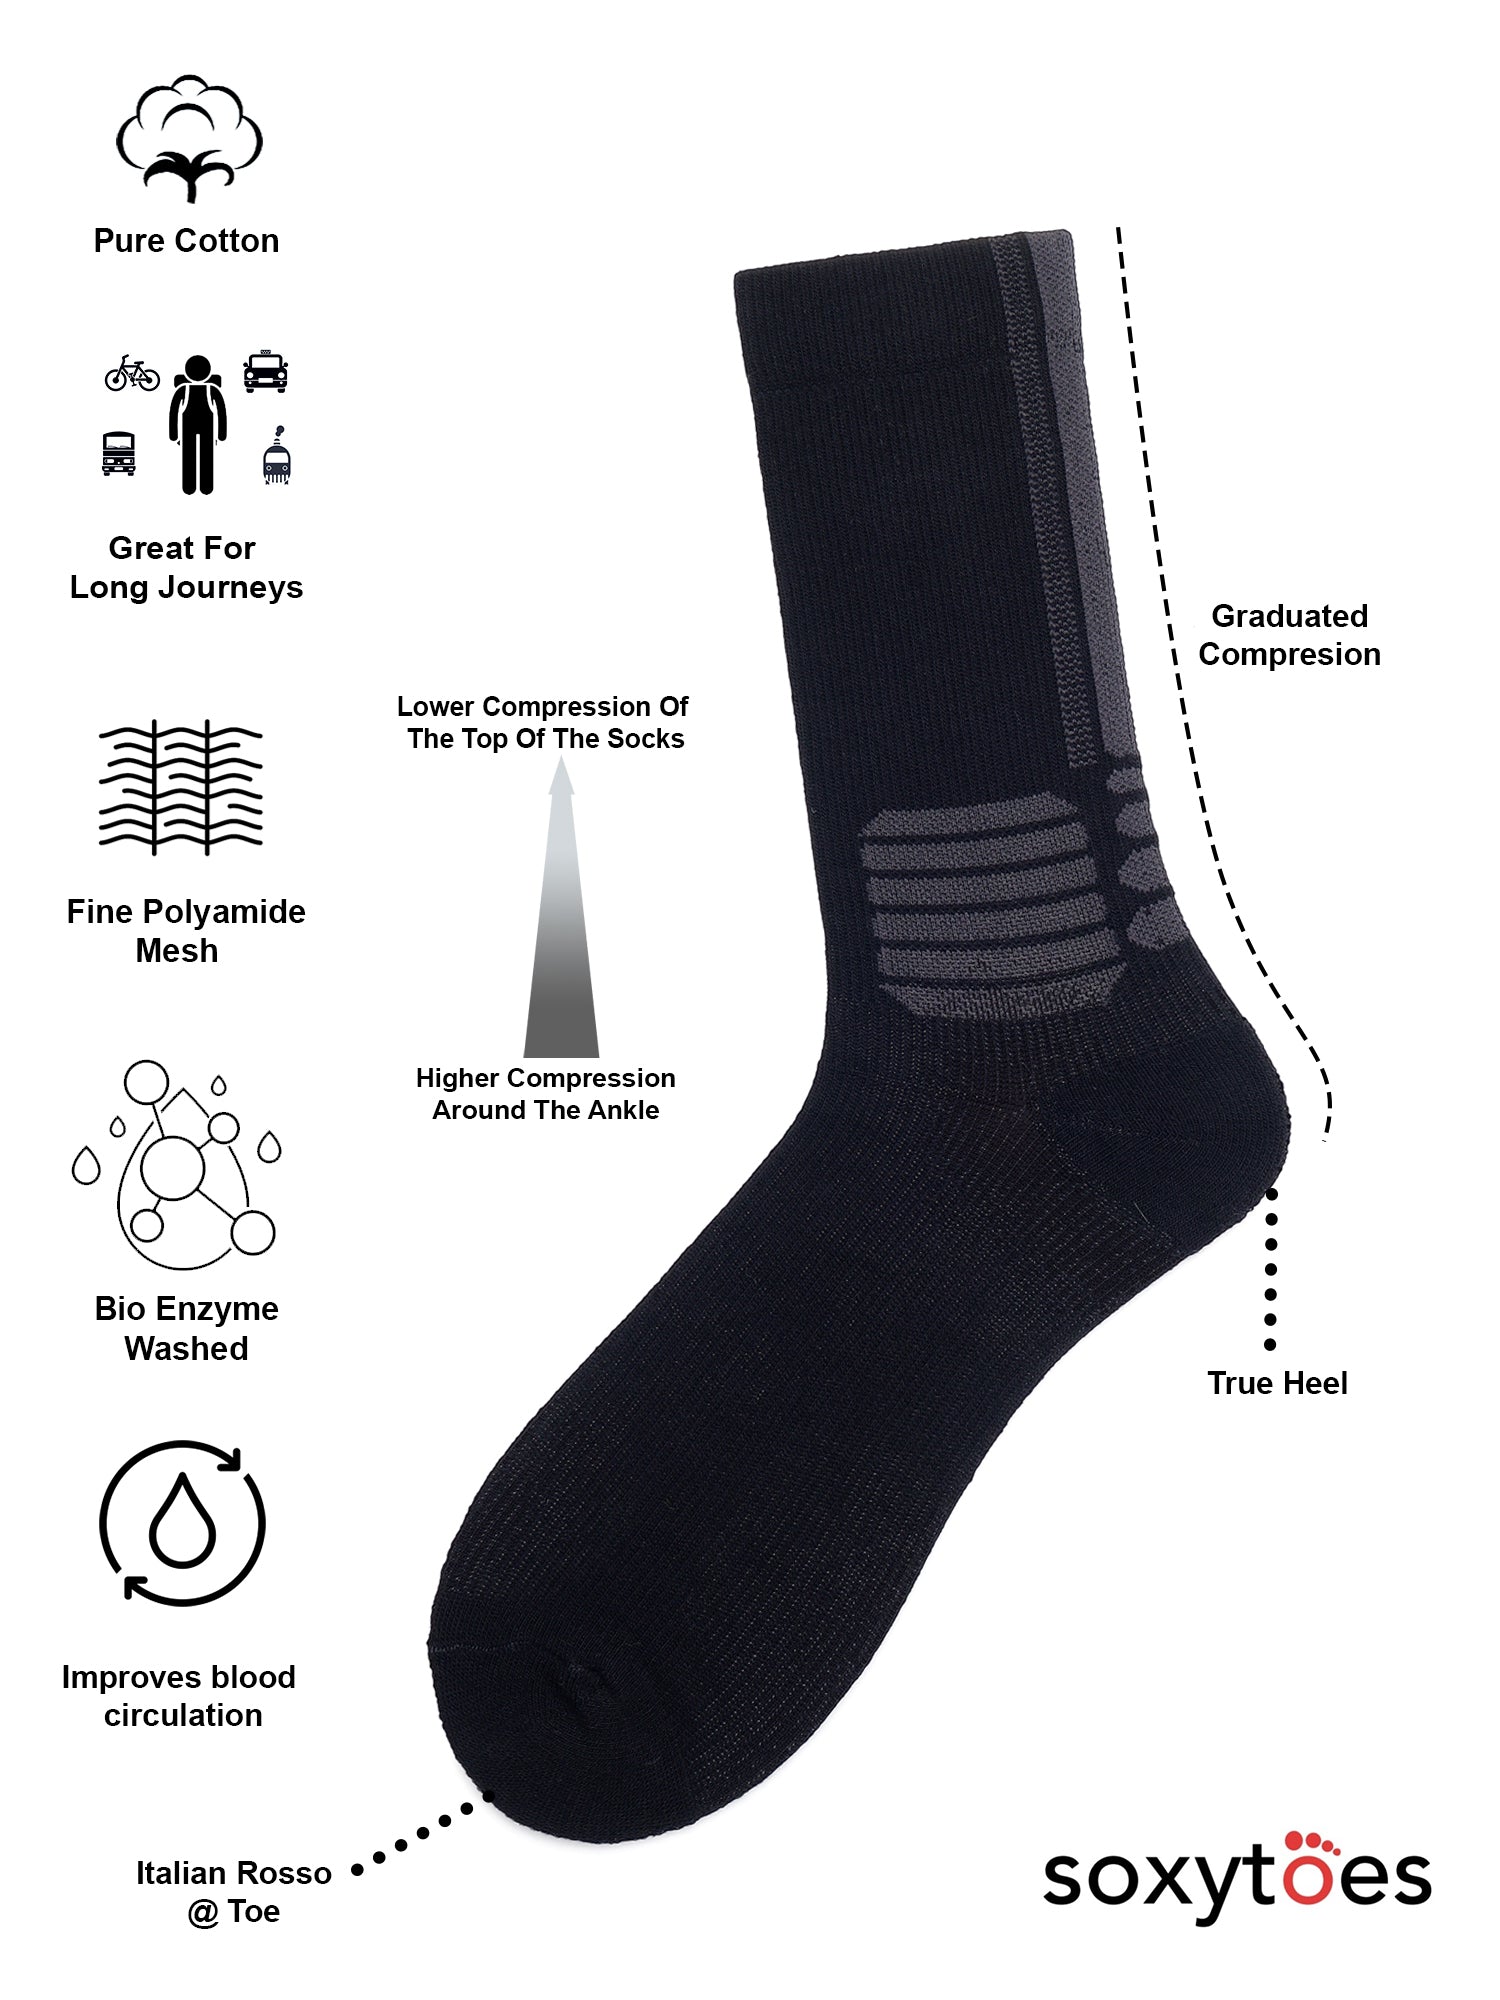 Compression Therapy | Stand Out Box Of 4 Pairs | Travel Socks